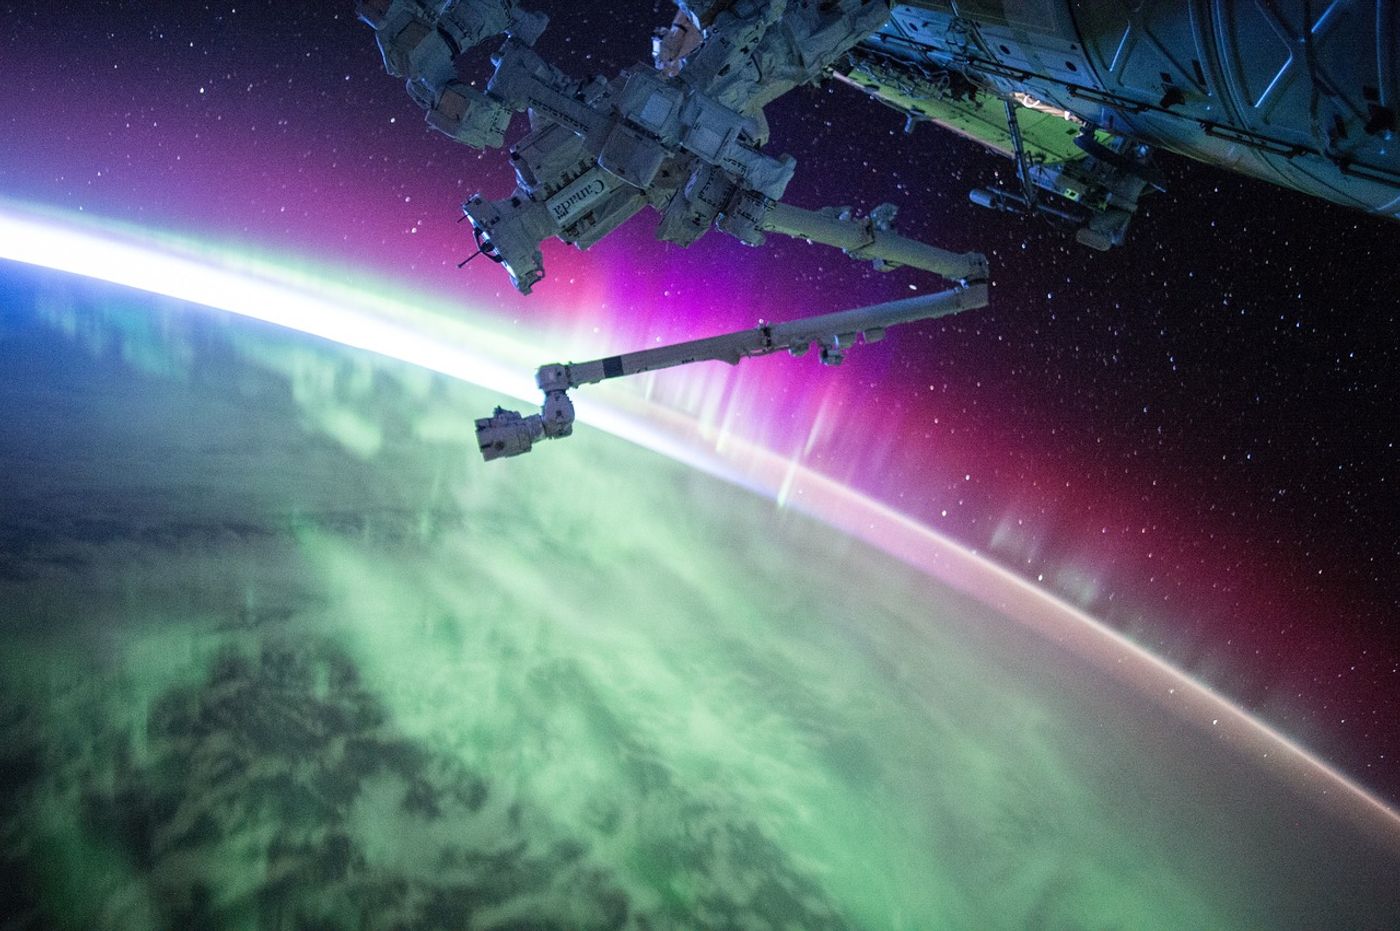 One of the biggest sources of radiation for International Space Station astronauts is the Sun. When solar storms occur, the Northern Lights illuminate the skies on Earth as the radiation slams into the Earth's atmosphere.